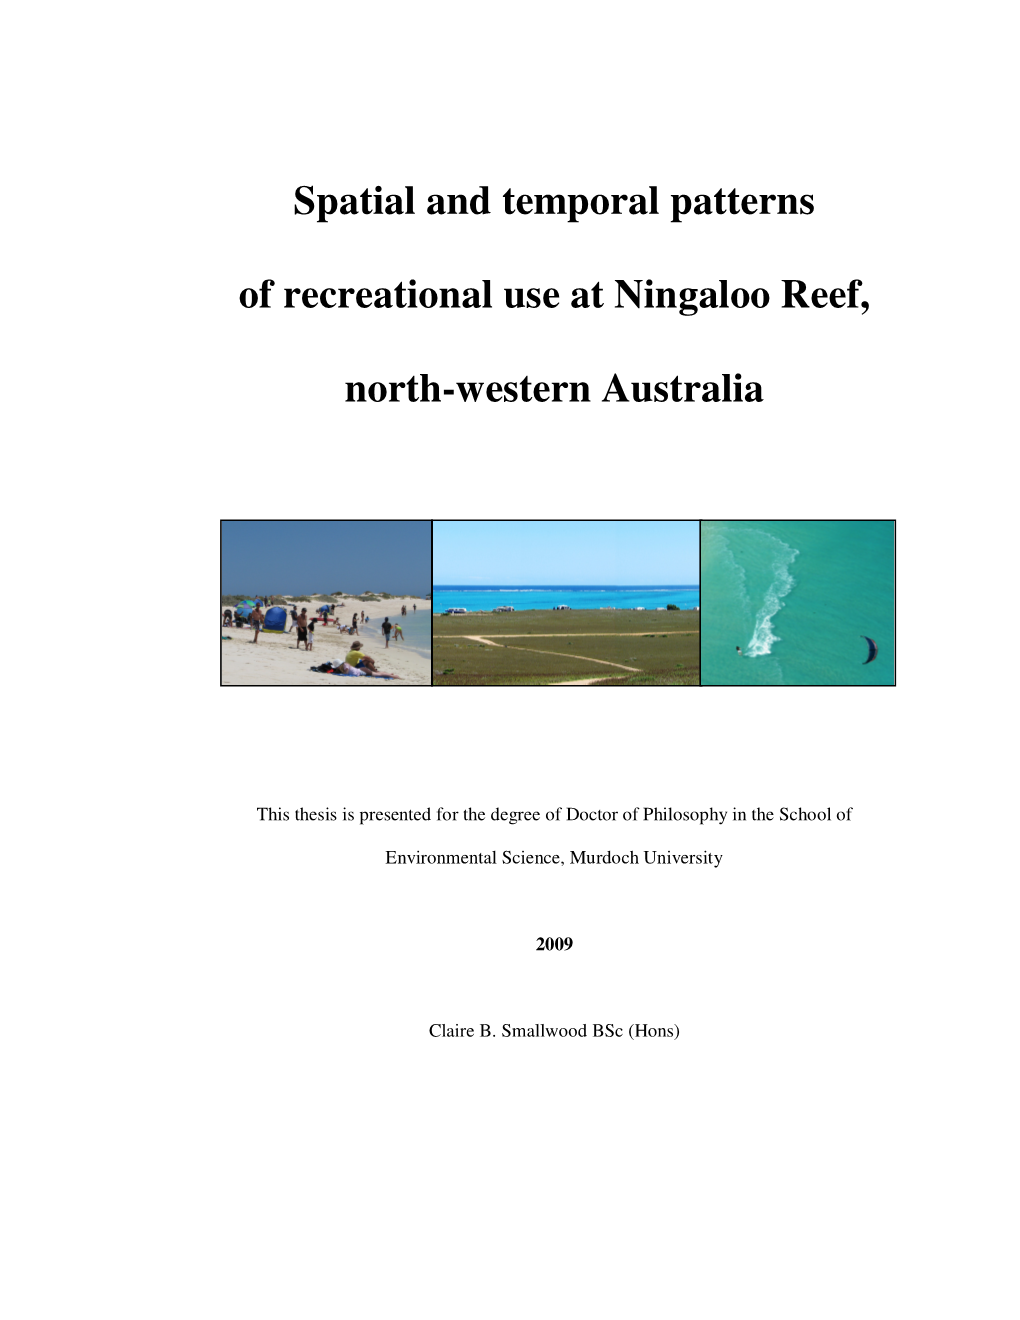 Spatial and Temporal Patterns of Recreational Use at Ningaloo Reef